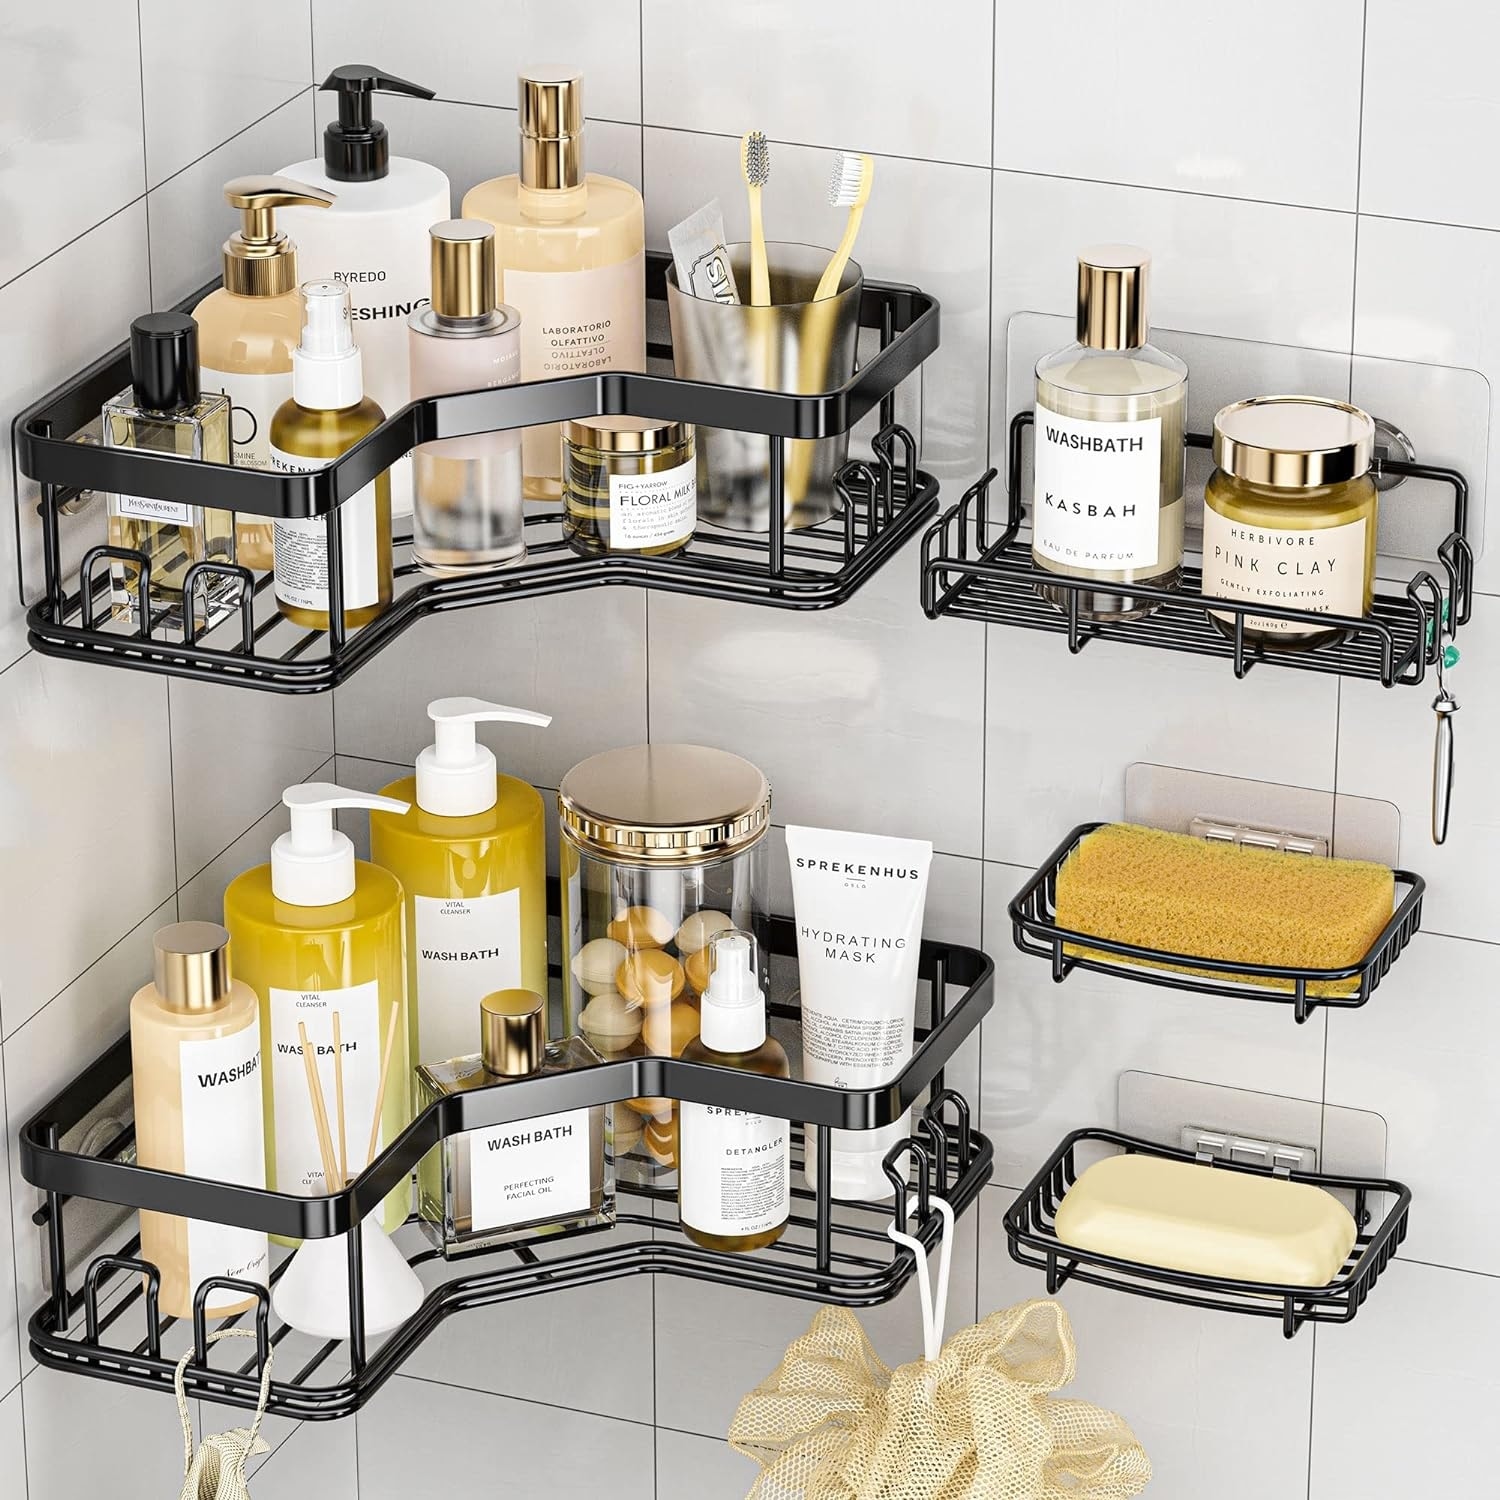 https://ak1.ostkcdn.com/images/products/is/images/direct/a575fda1b7799be336804b02722fa11017085460/5-Pack-Shower-Organizer%2C-Large-Capacity-Stainless-Steel-Shower-Caddy-Bathroom-Organizer-Shower-Shelves.jpg